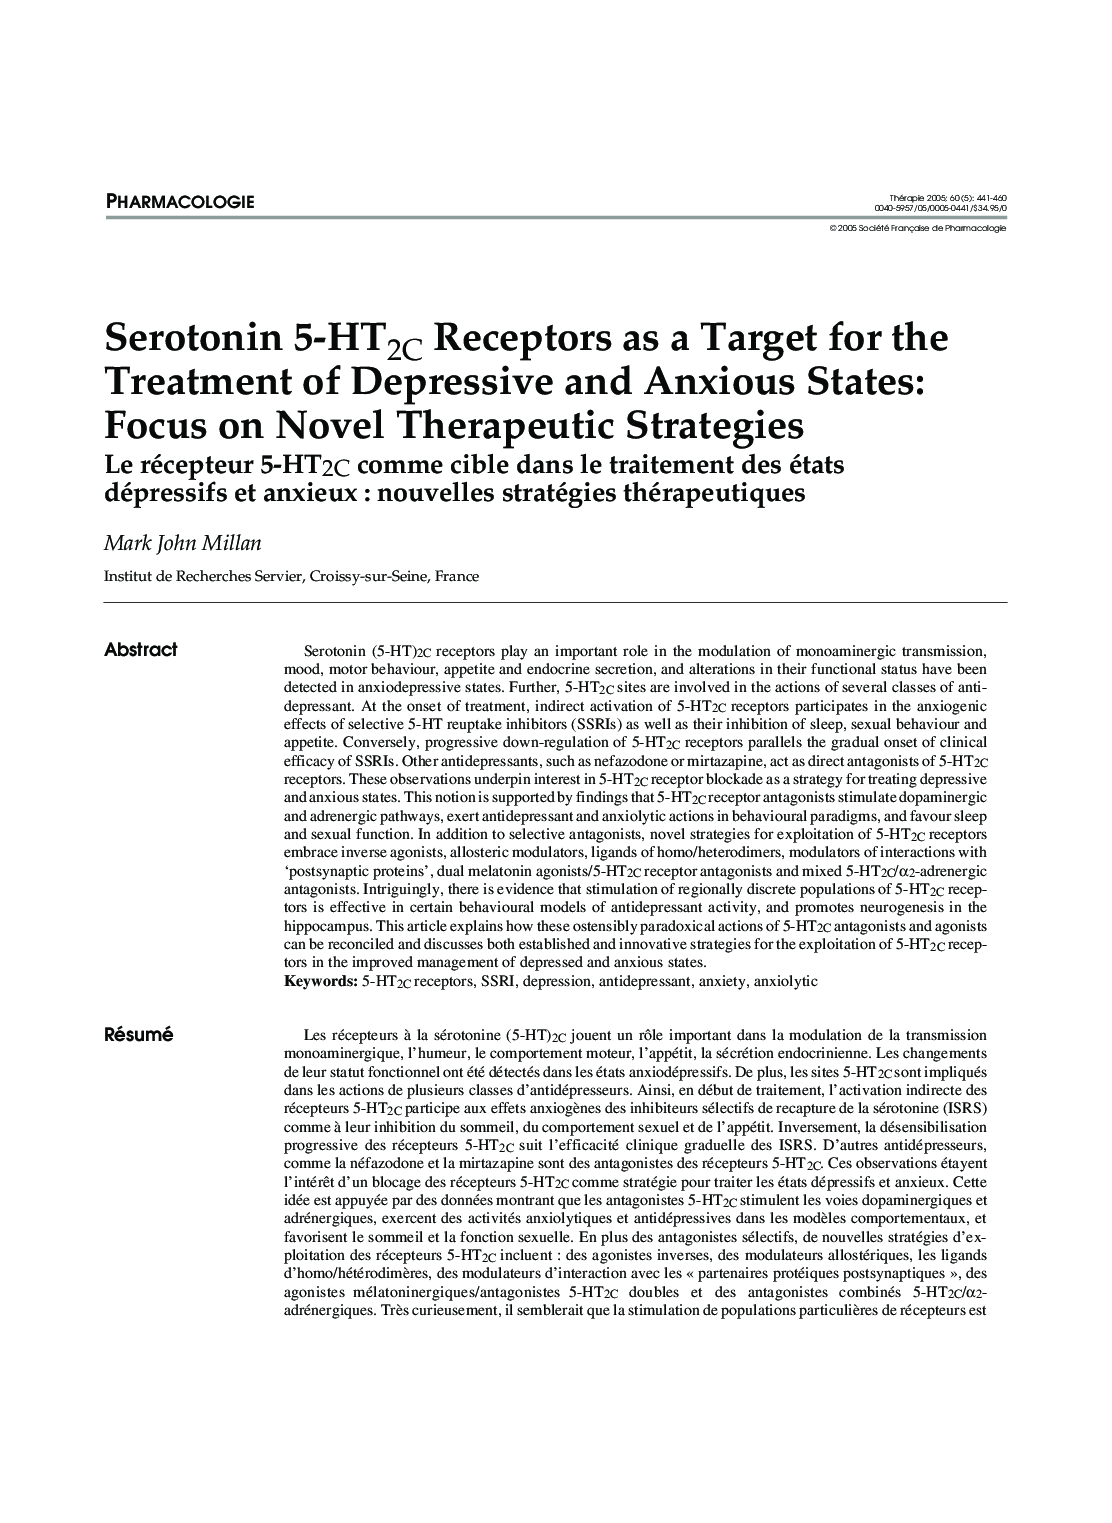 Serotonin 5-HT2C Receptors as a Target for the Treatment of Depressive and Anxious States: Focus on Novel Therapeutic Strategies